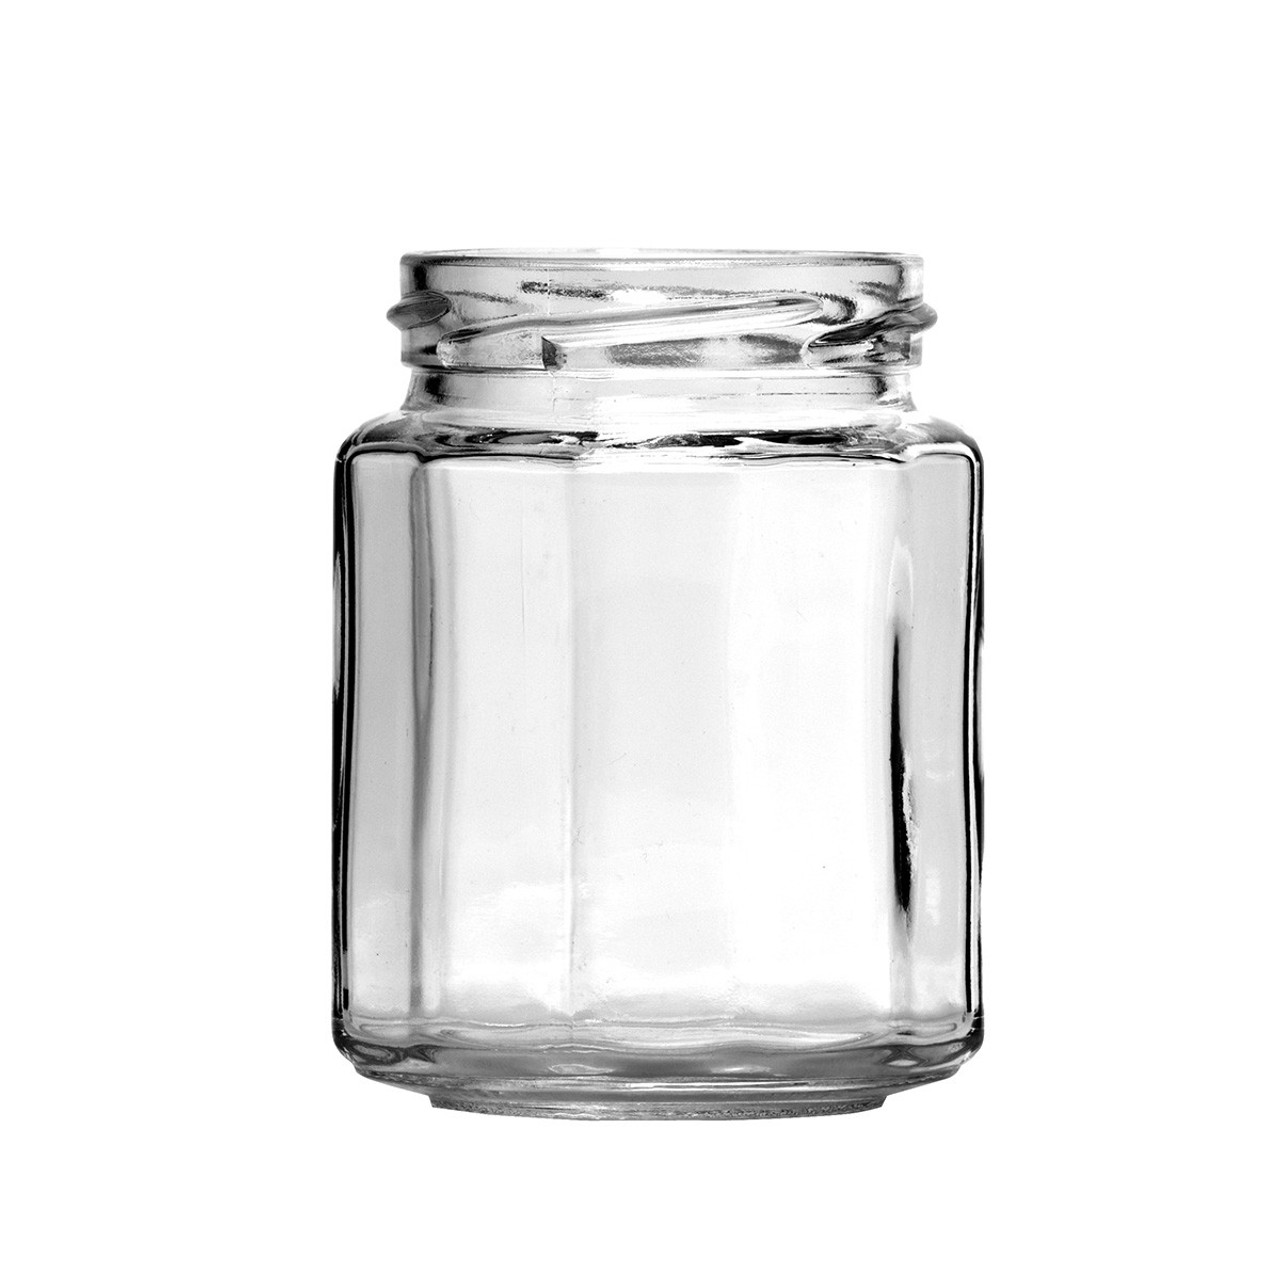 10 oz (292 ml) Victorian Square Glass Jar with Gold Lid